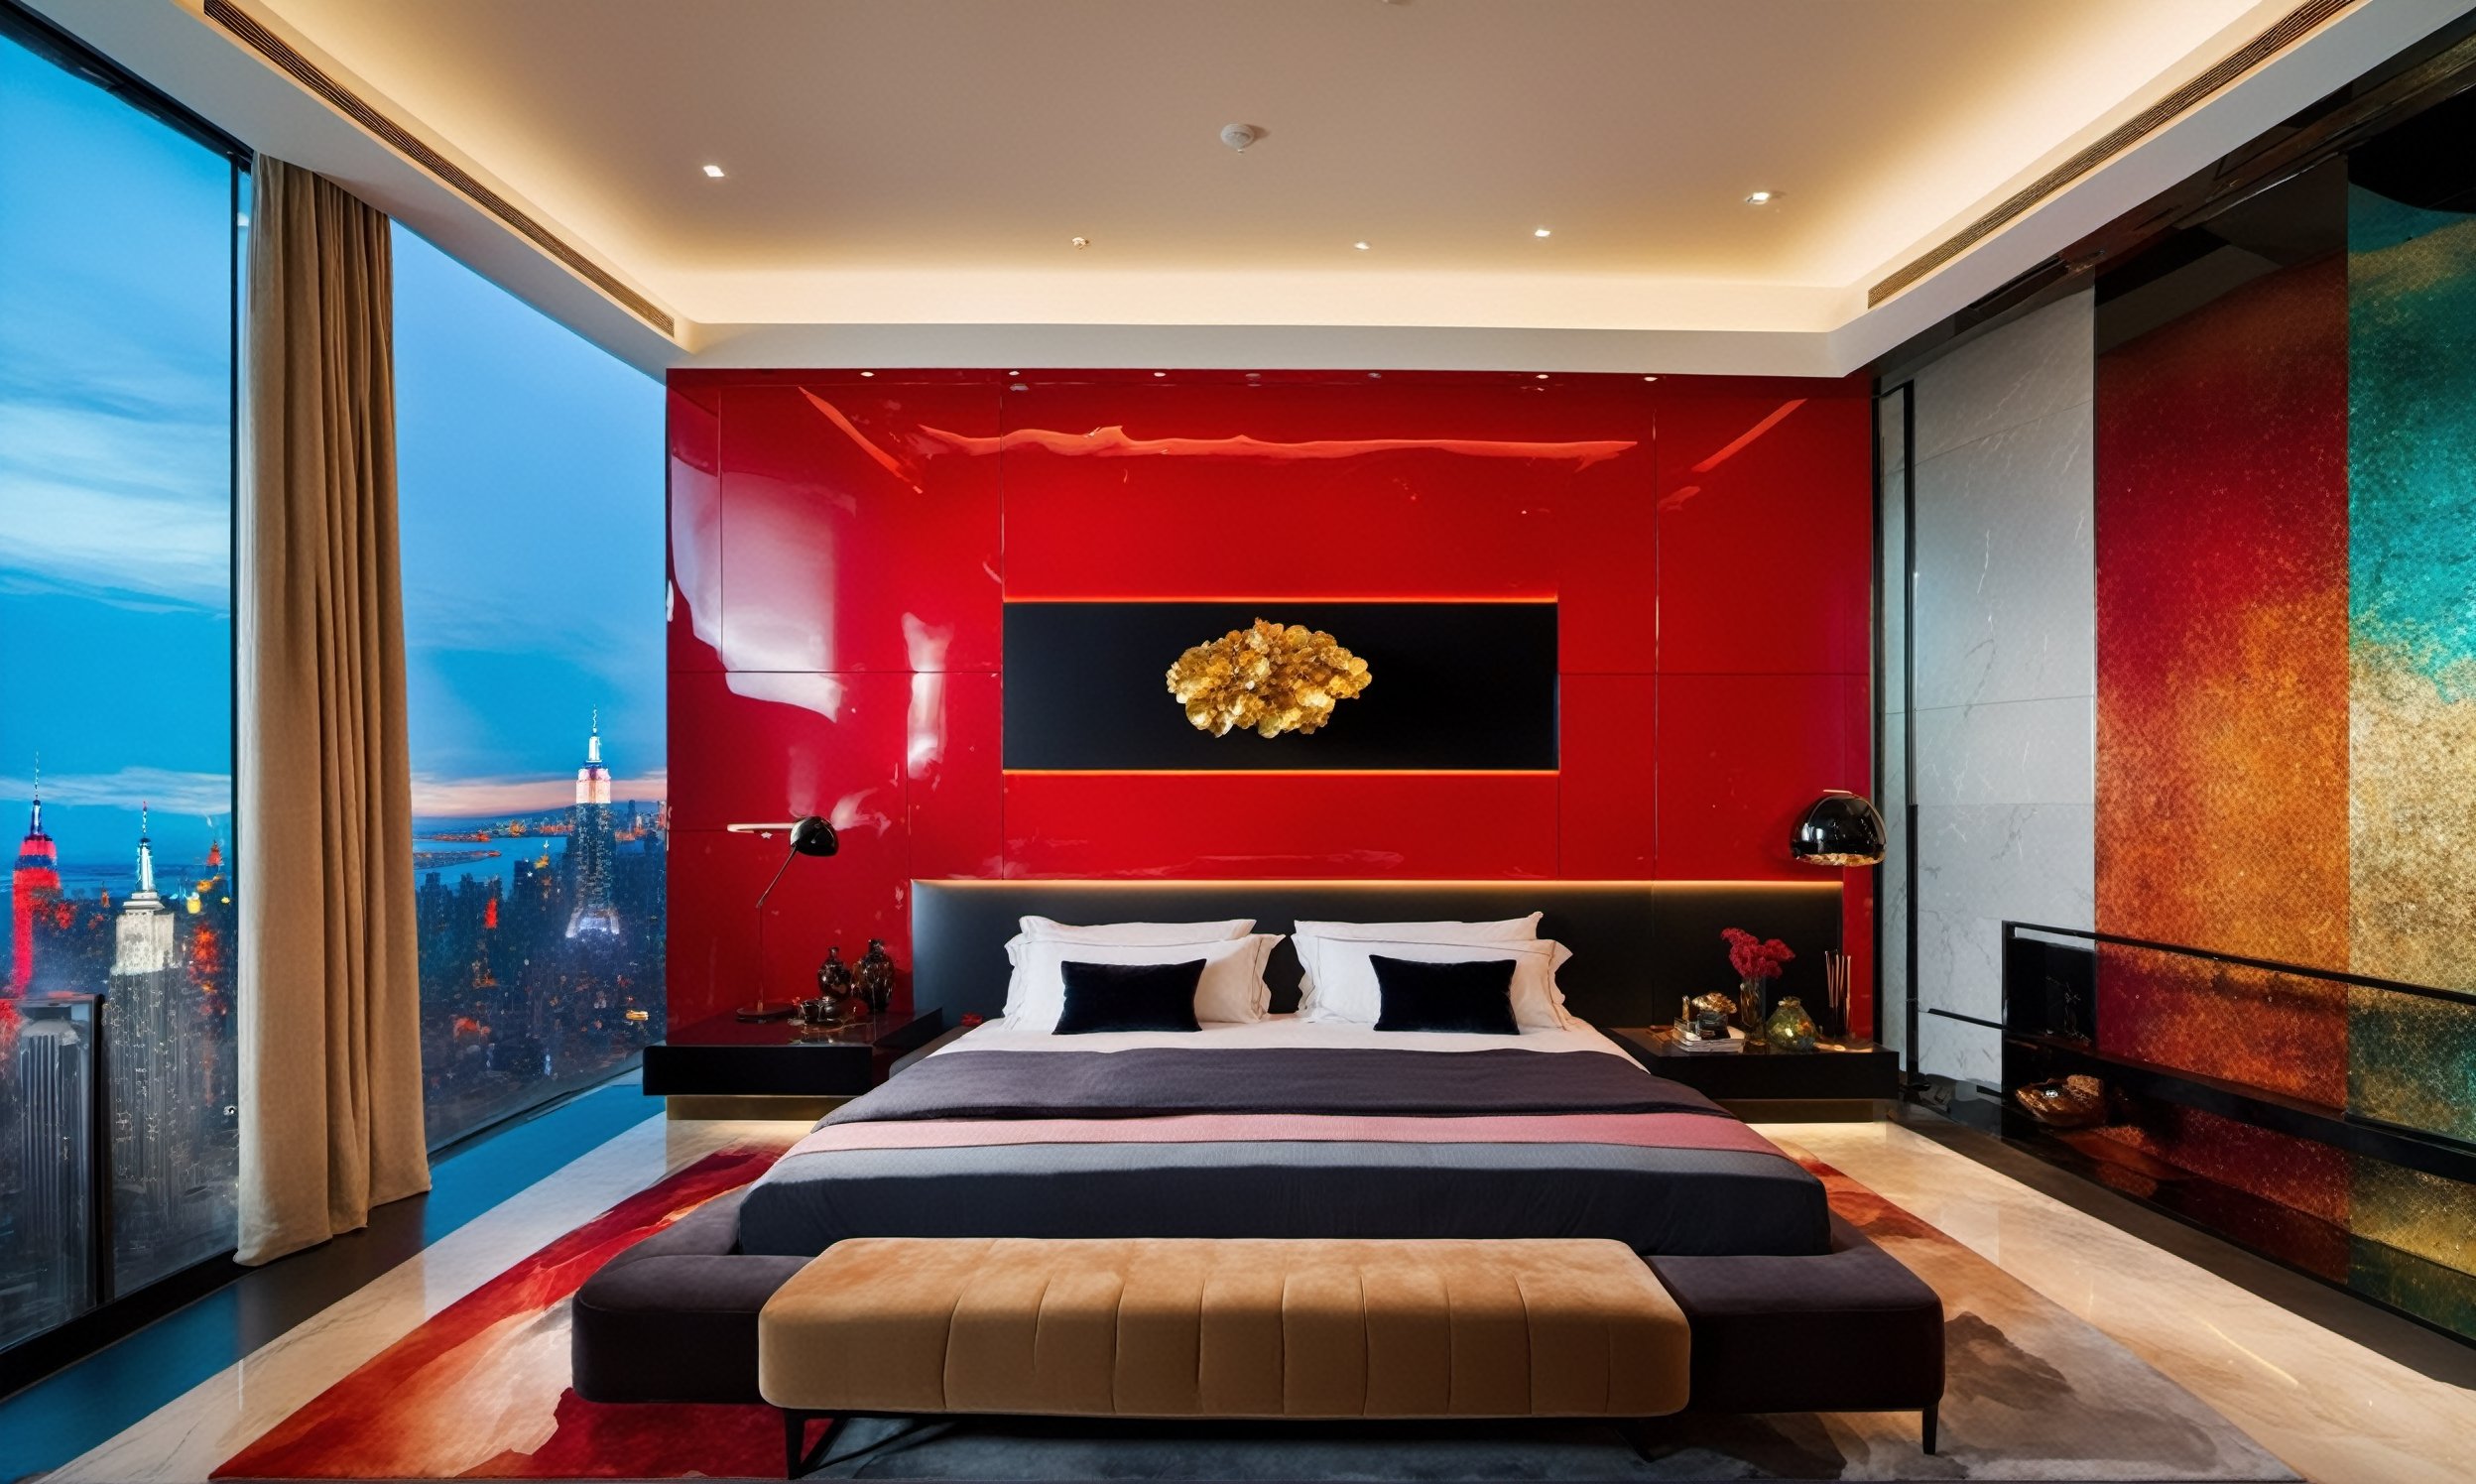 A wide-angle shot captures the masculine high tech and modern and classy fung shui vibe of the bedroom with colors of black red silver gold and glass, there is a large bed with black and red beding, a projector casts a image that covers a hole wall that is displaying a colorful vibrant clear image of a nature seane, there is another wall that is windows with a view of New York city, every color and form in the room has equal balance, the room has a uniformed square checkerboard patern marble floor that is the central focal point amidst the tall walls and soaring ceiling. The camera gazes upon the square space, with a  larger back wall and shorter side walls that are even and have no doors, the room is about new beginnings and possibilities.,Modern,cinematic_warm_color